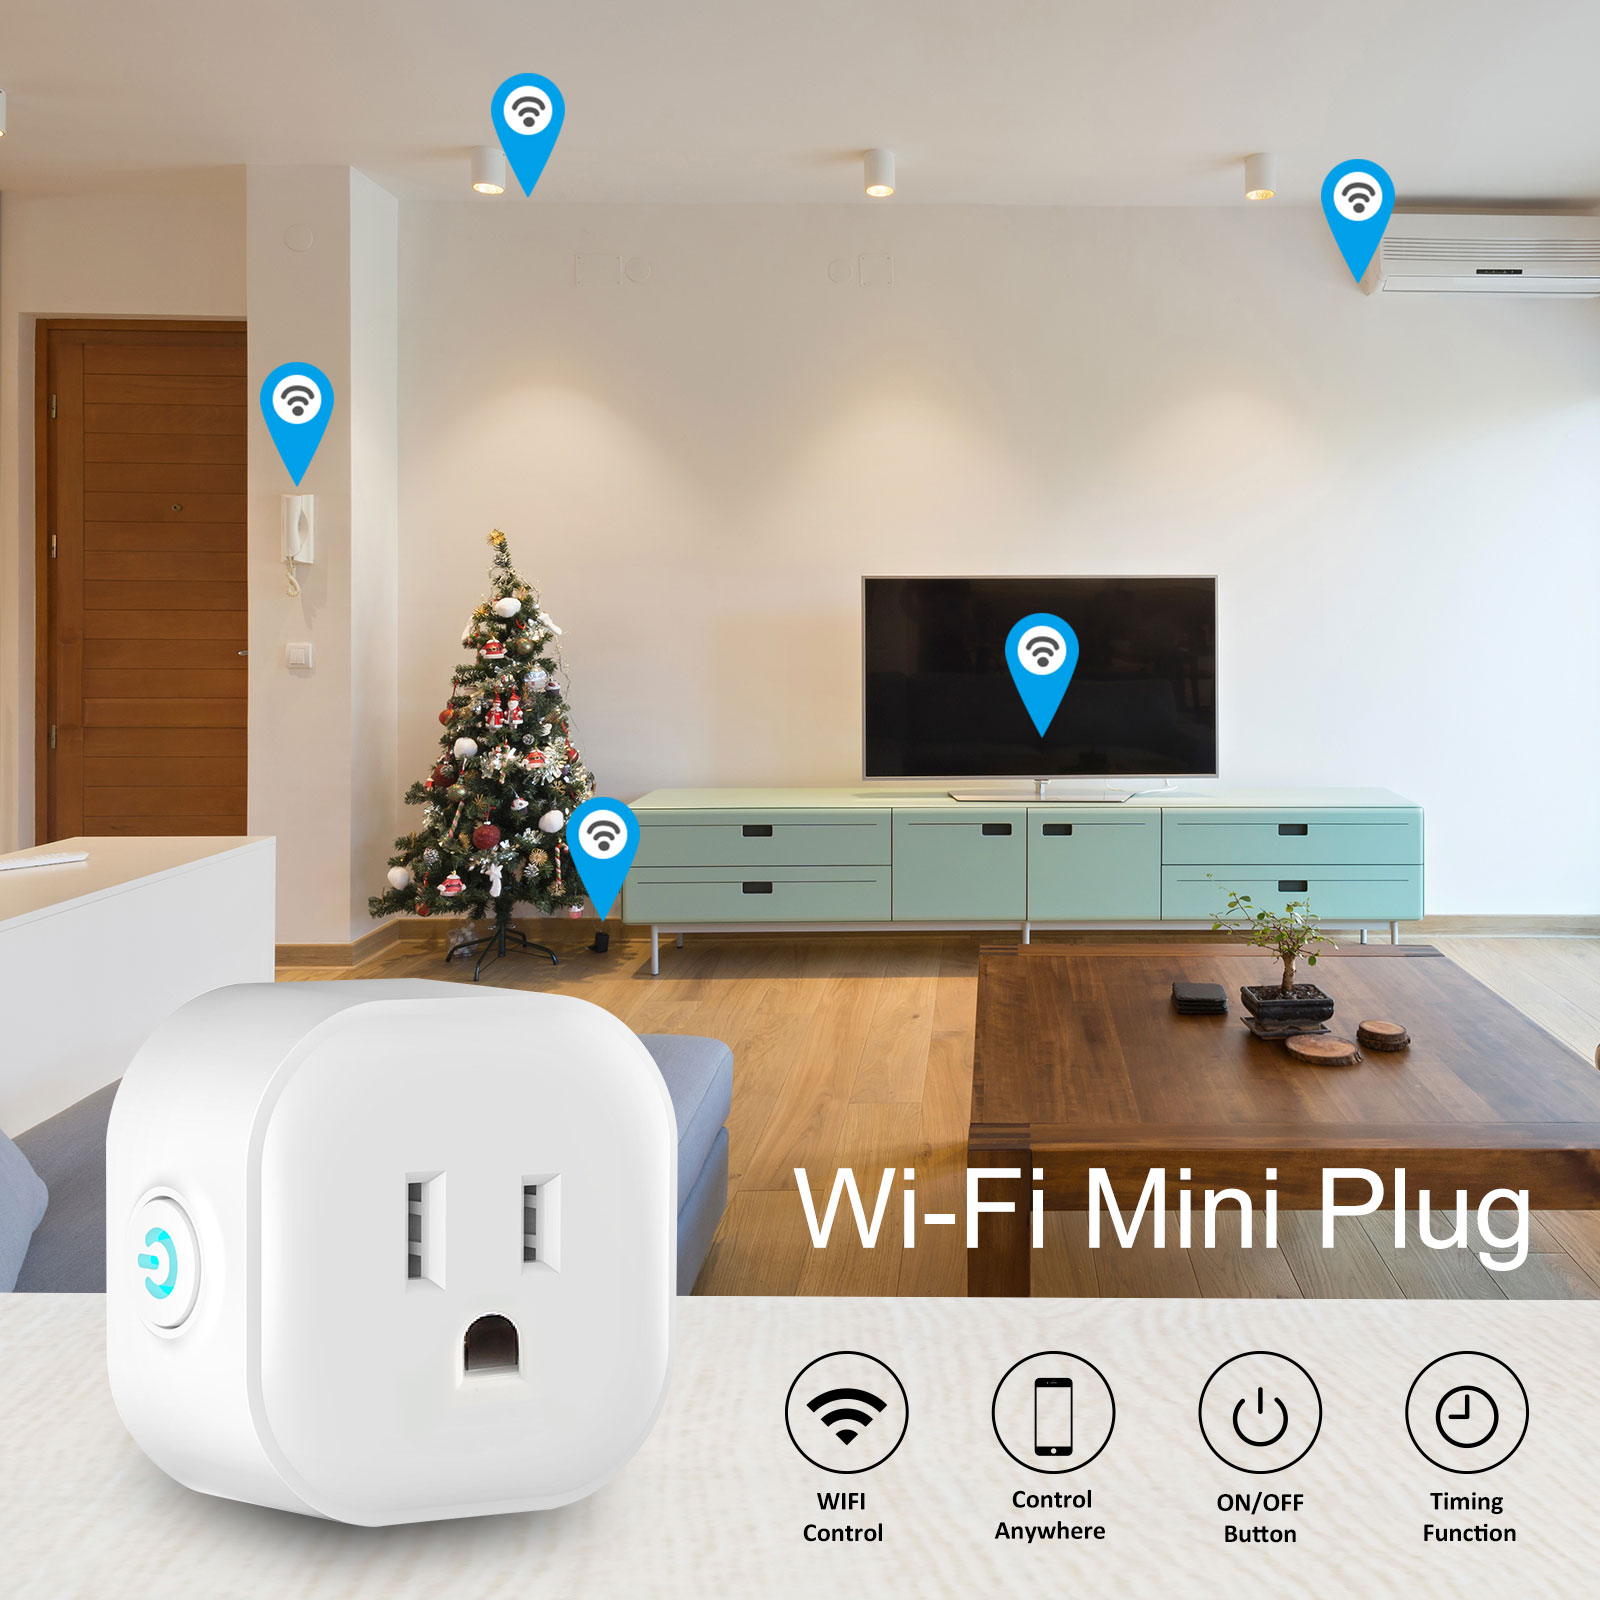 How to Connect a Smart Plug to Wi-Fi